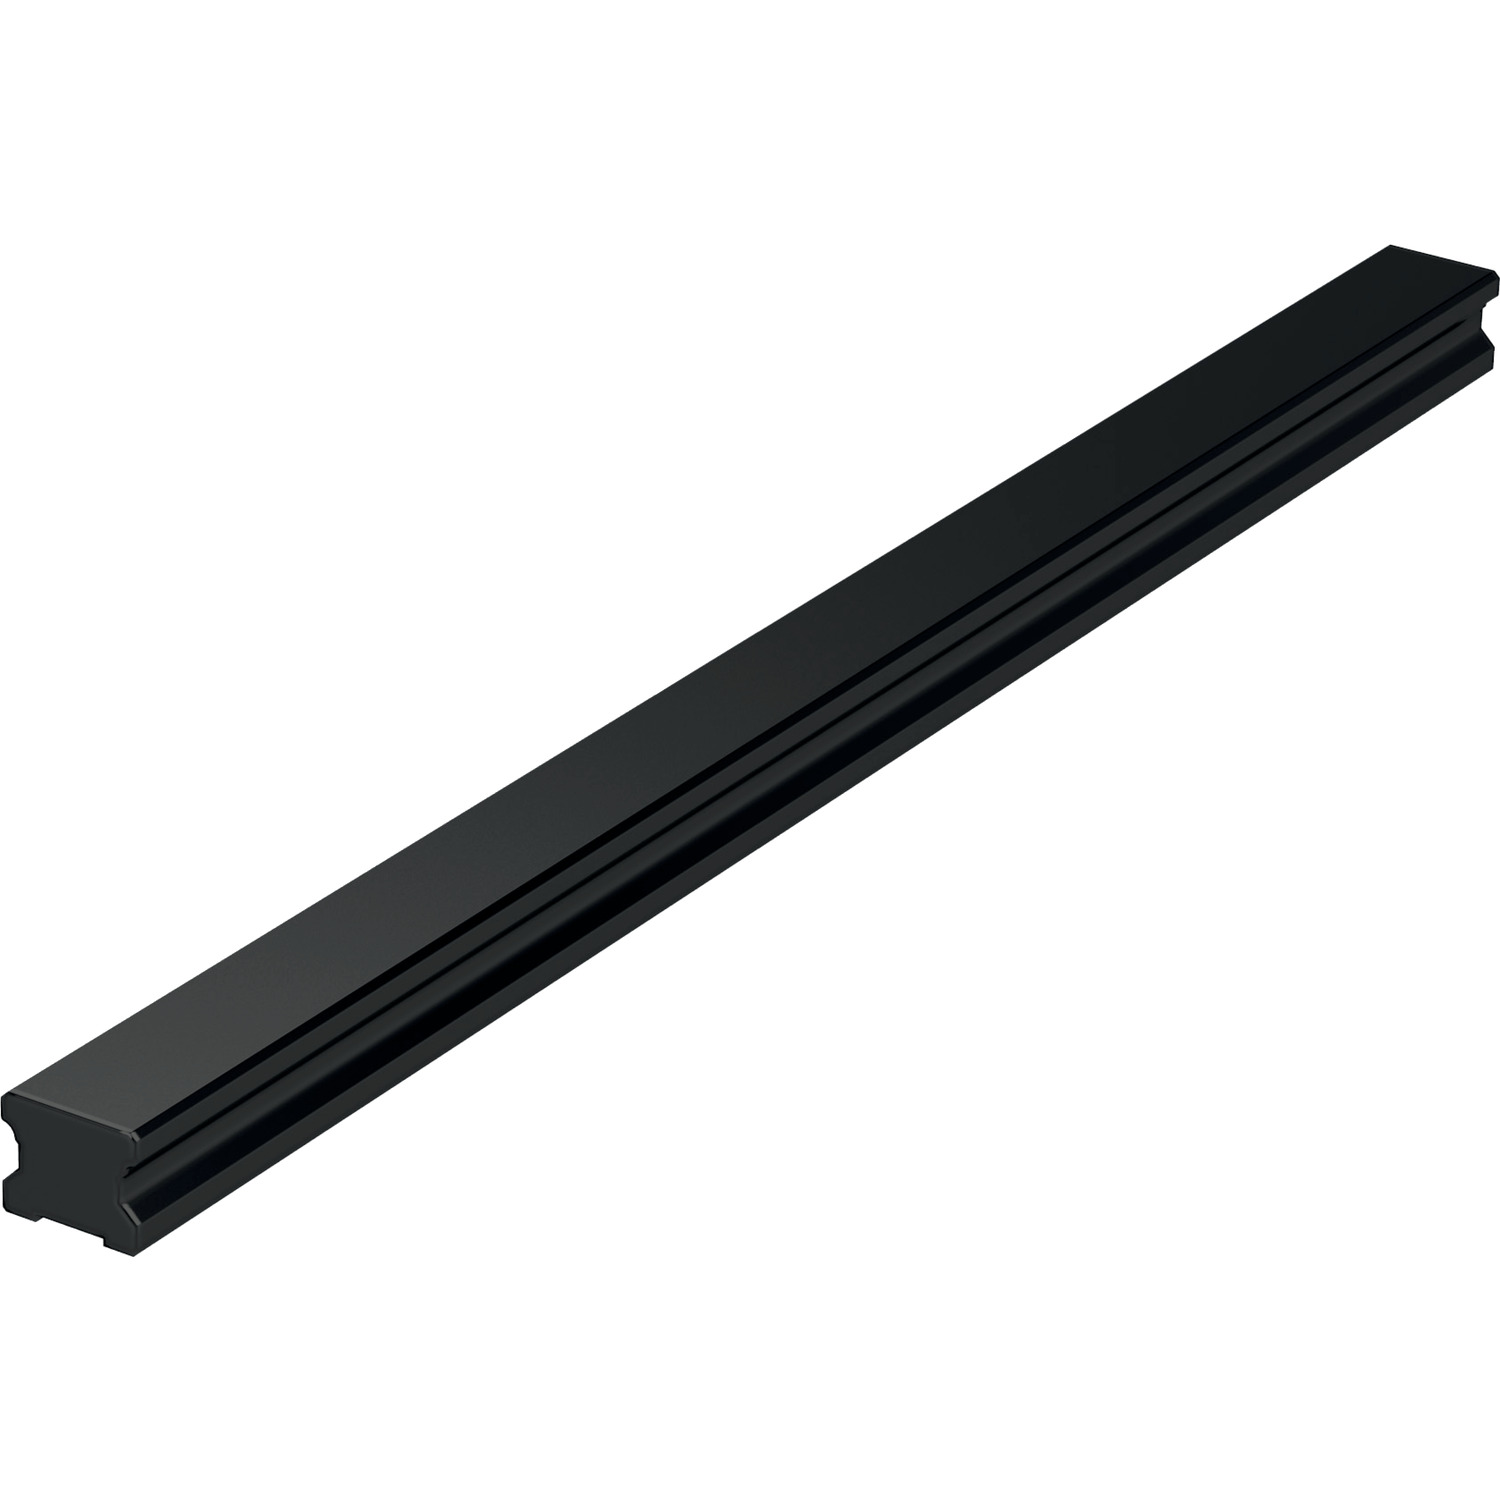 20mm Linear Guide Rail Rear fixing blackened 20mm rails. Custom sizes also available.